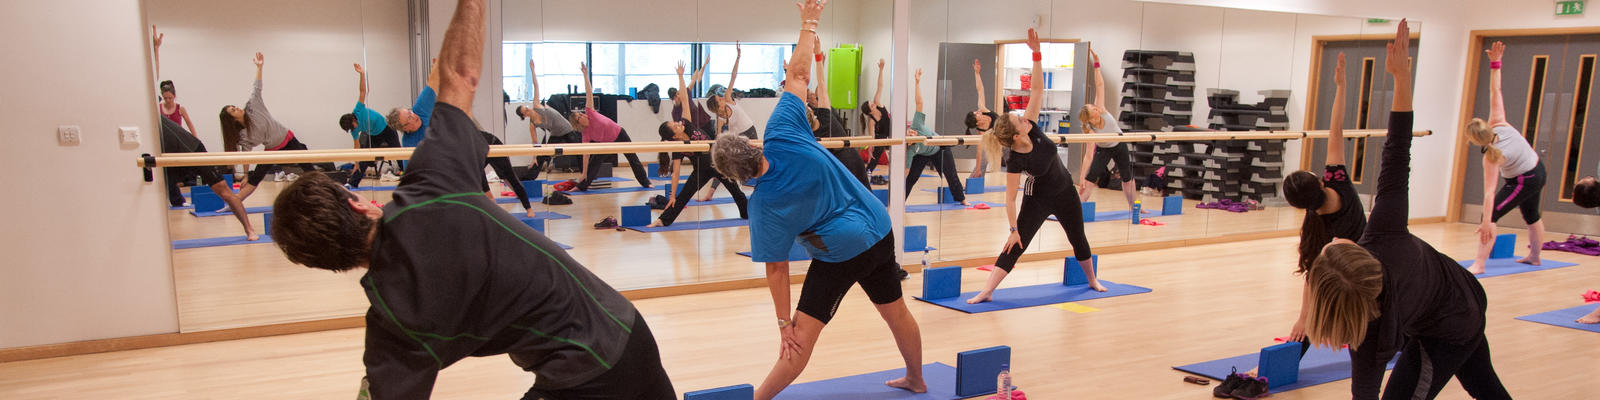 An instructor takes a yoga class in one of the studios